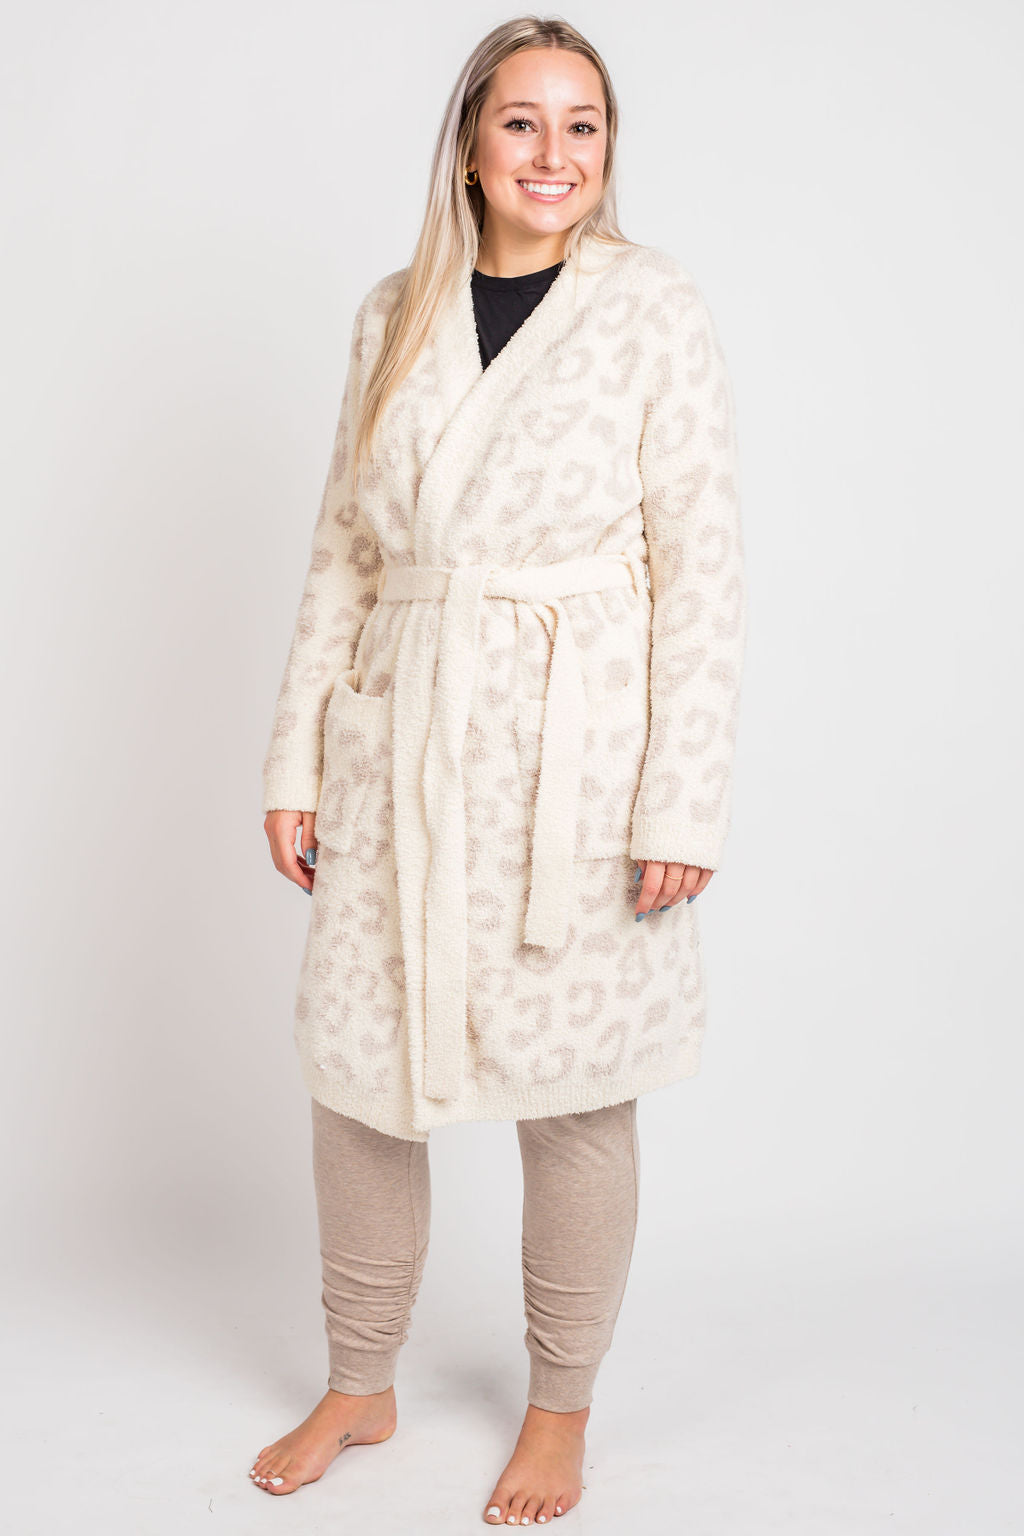 Barefoot Dreams CozyChic In The Wild Robe Loungewear in Cream/Stone at Wrapsody